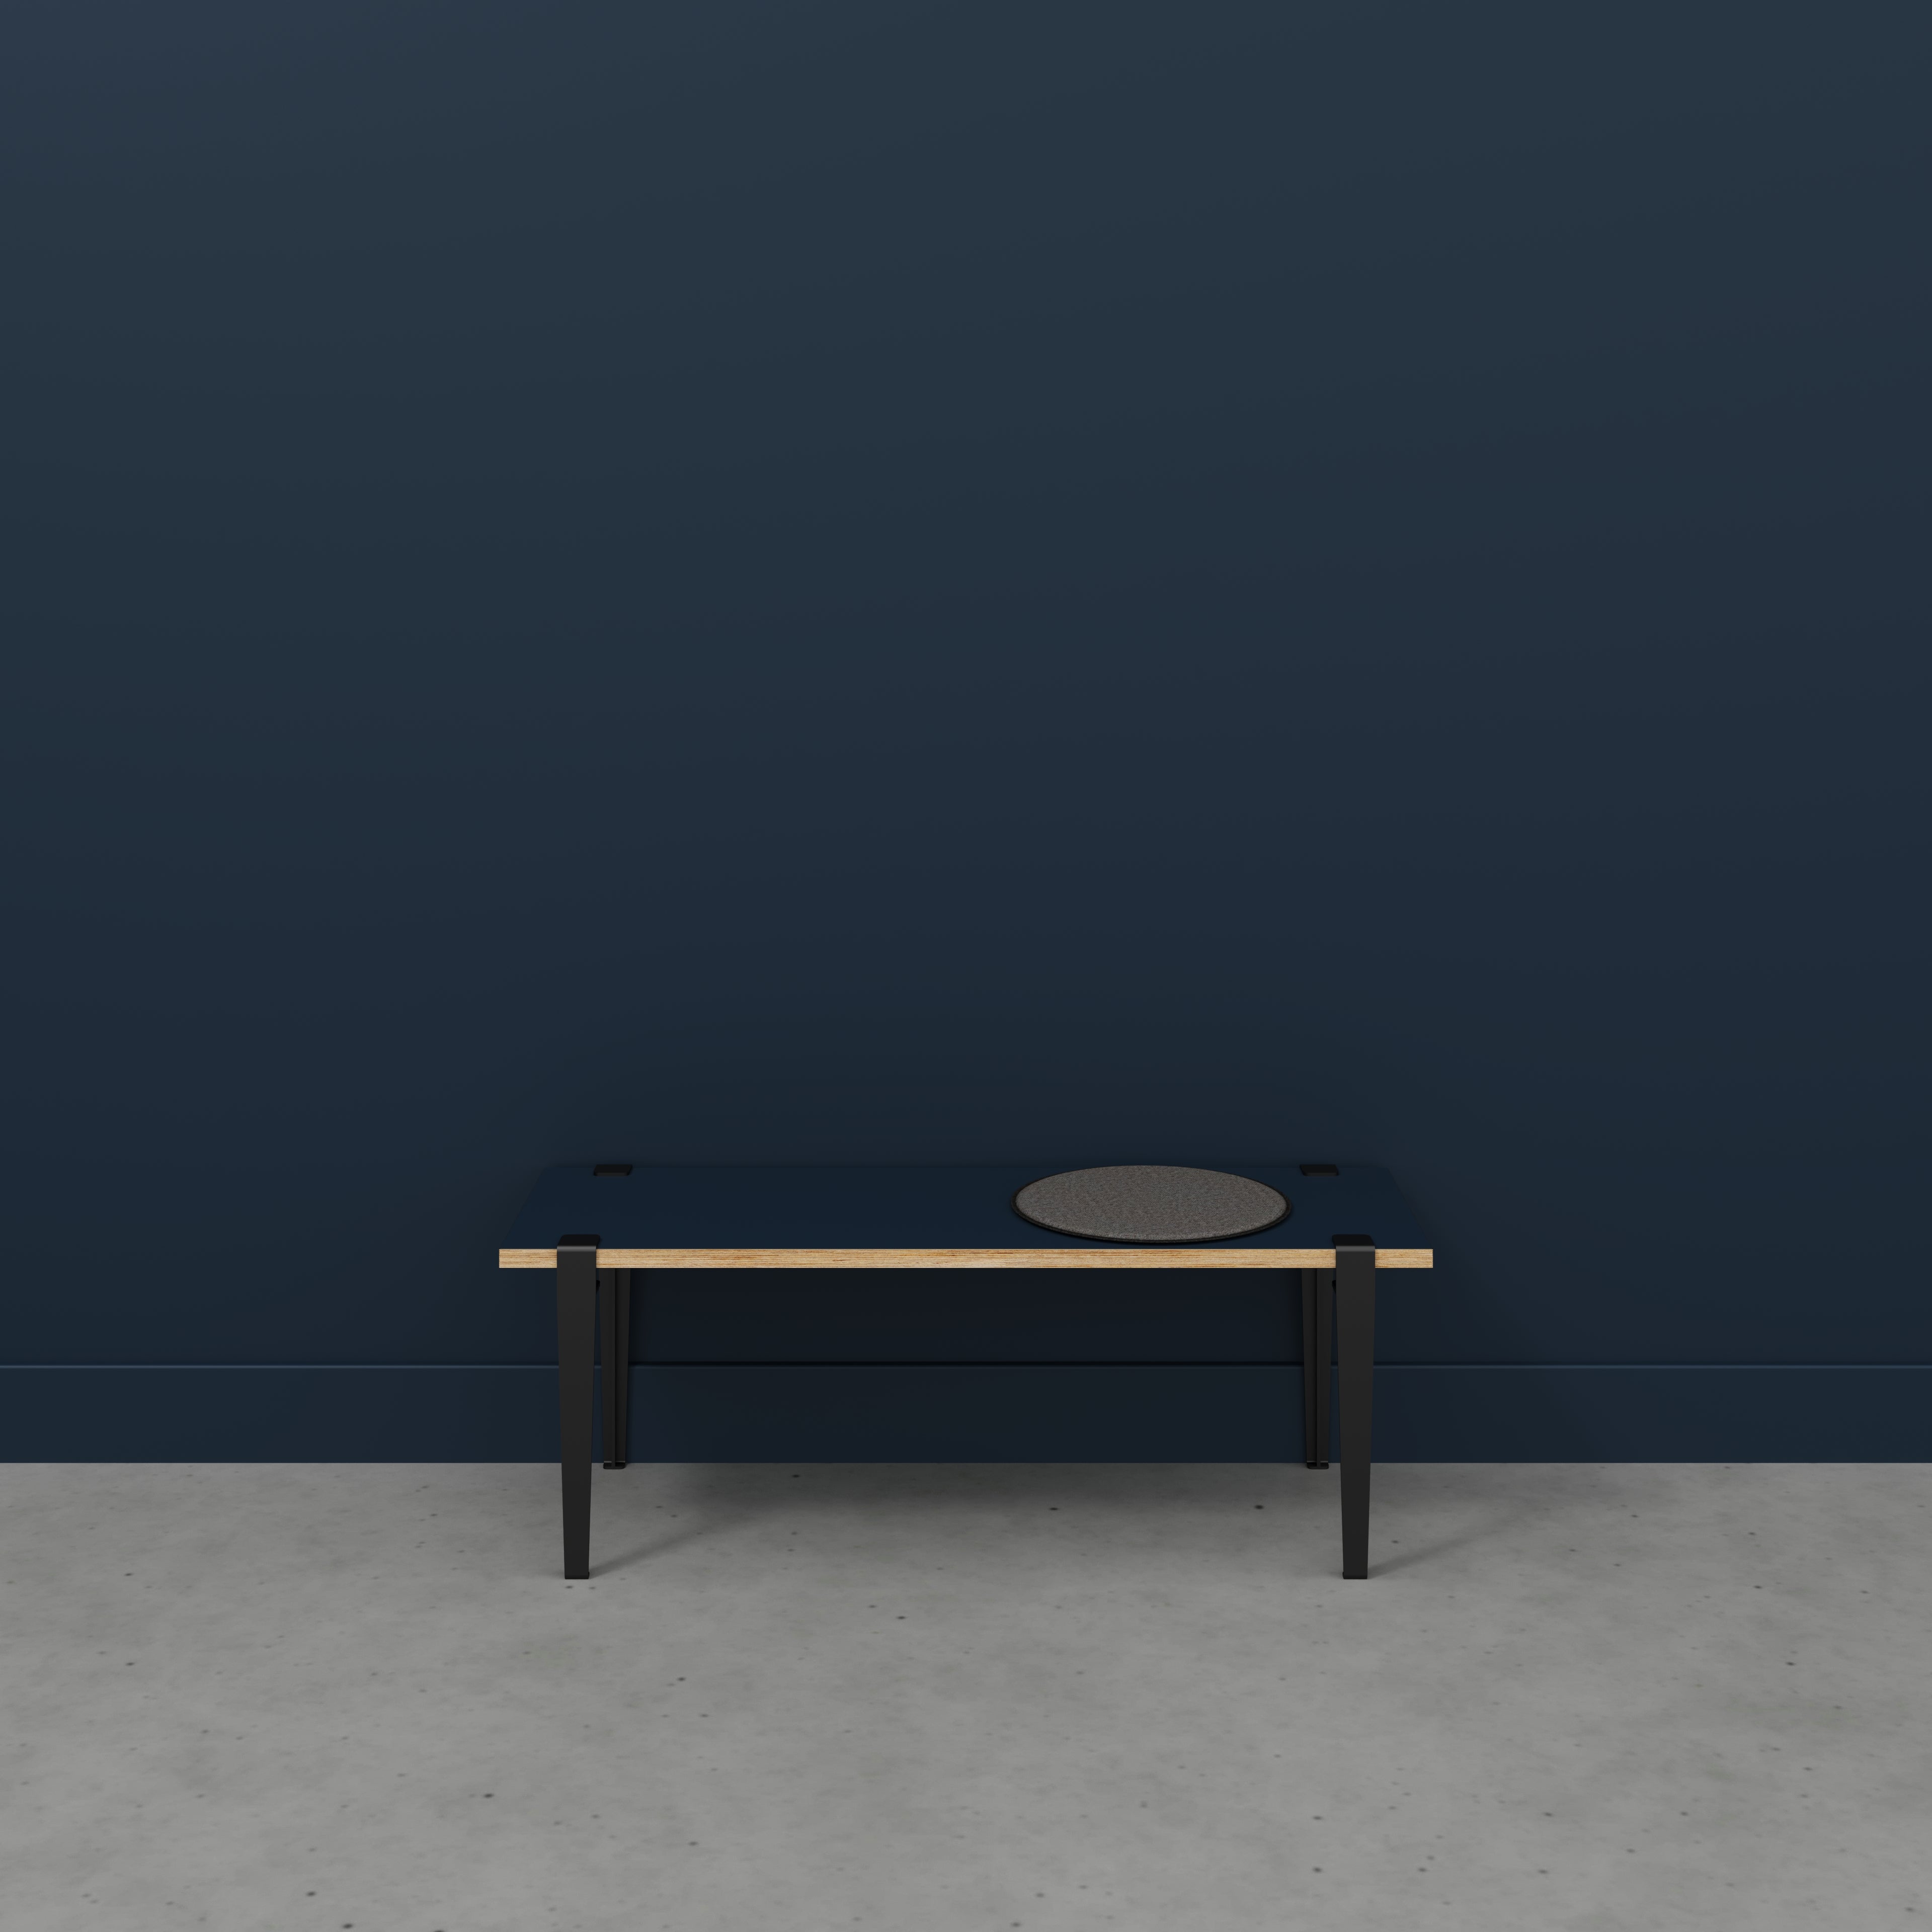 Bench Seat with Black Tiptoe Legs - Formica Night Sea Blue - 1200(w) x 400(d) x 450(h)